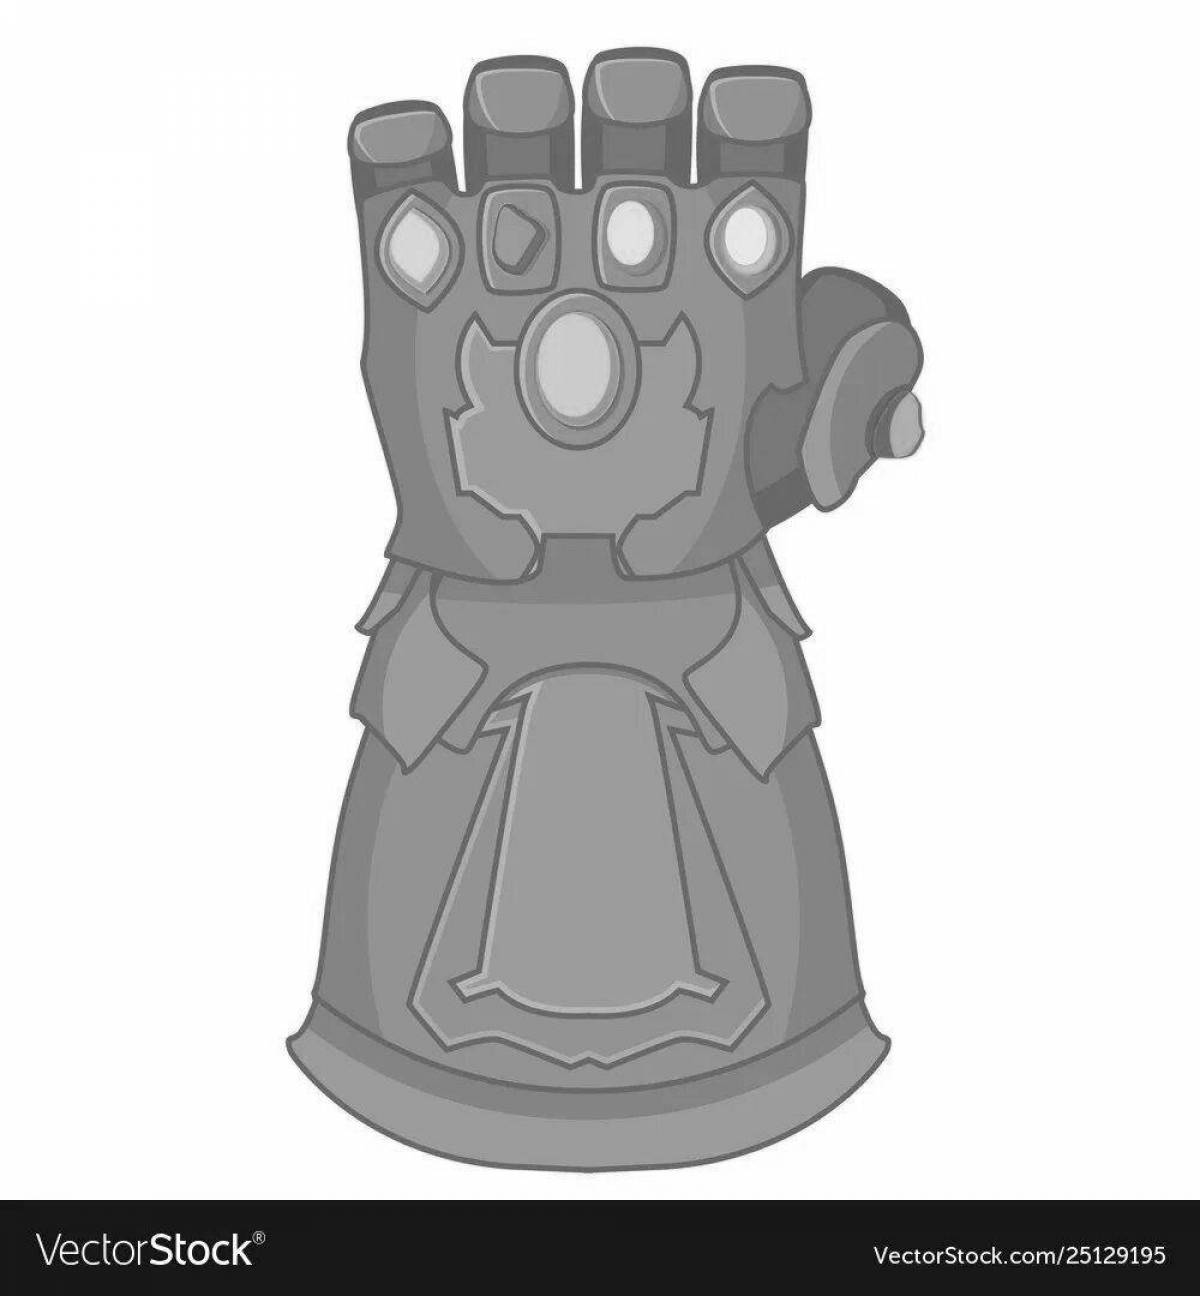 Great infinity gauntlet coloring page